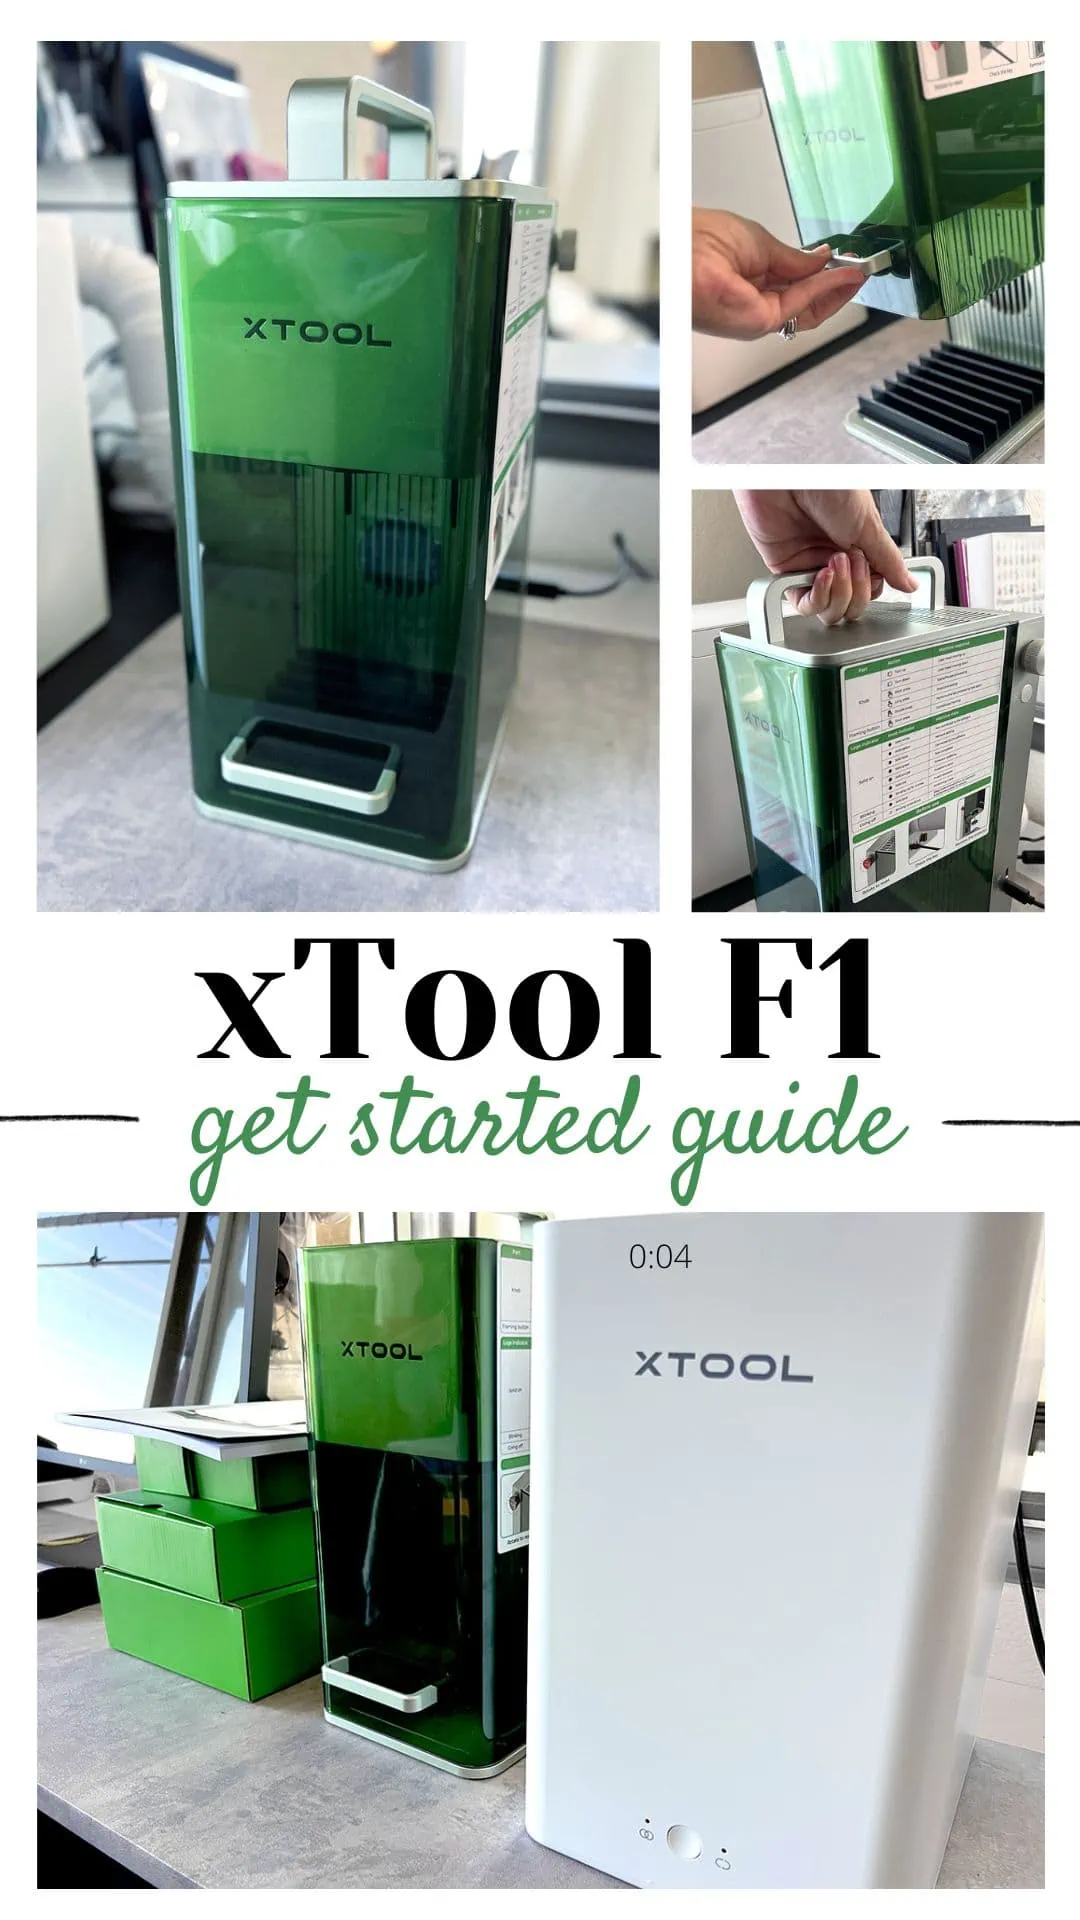 xTool F1 get started guide